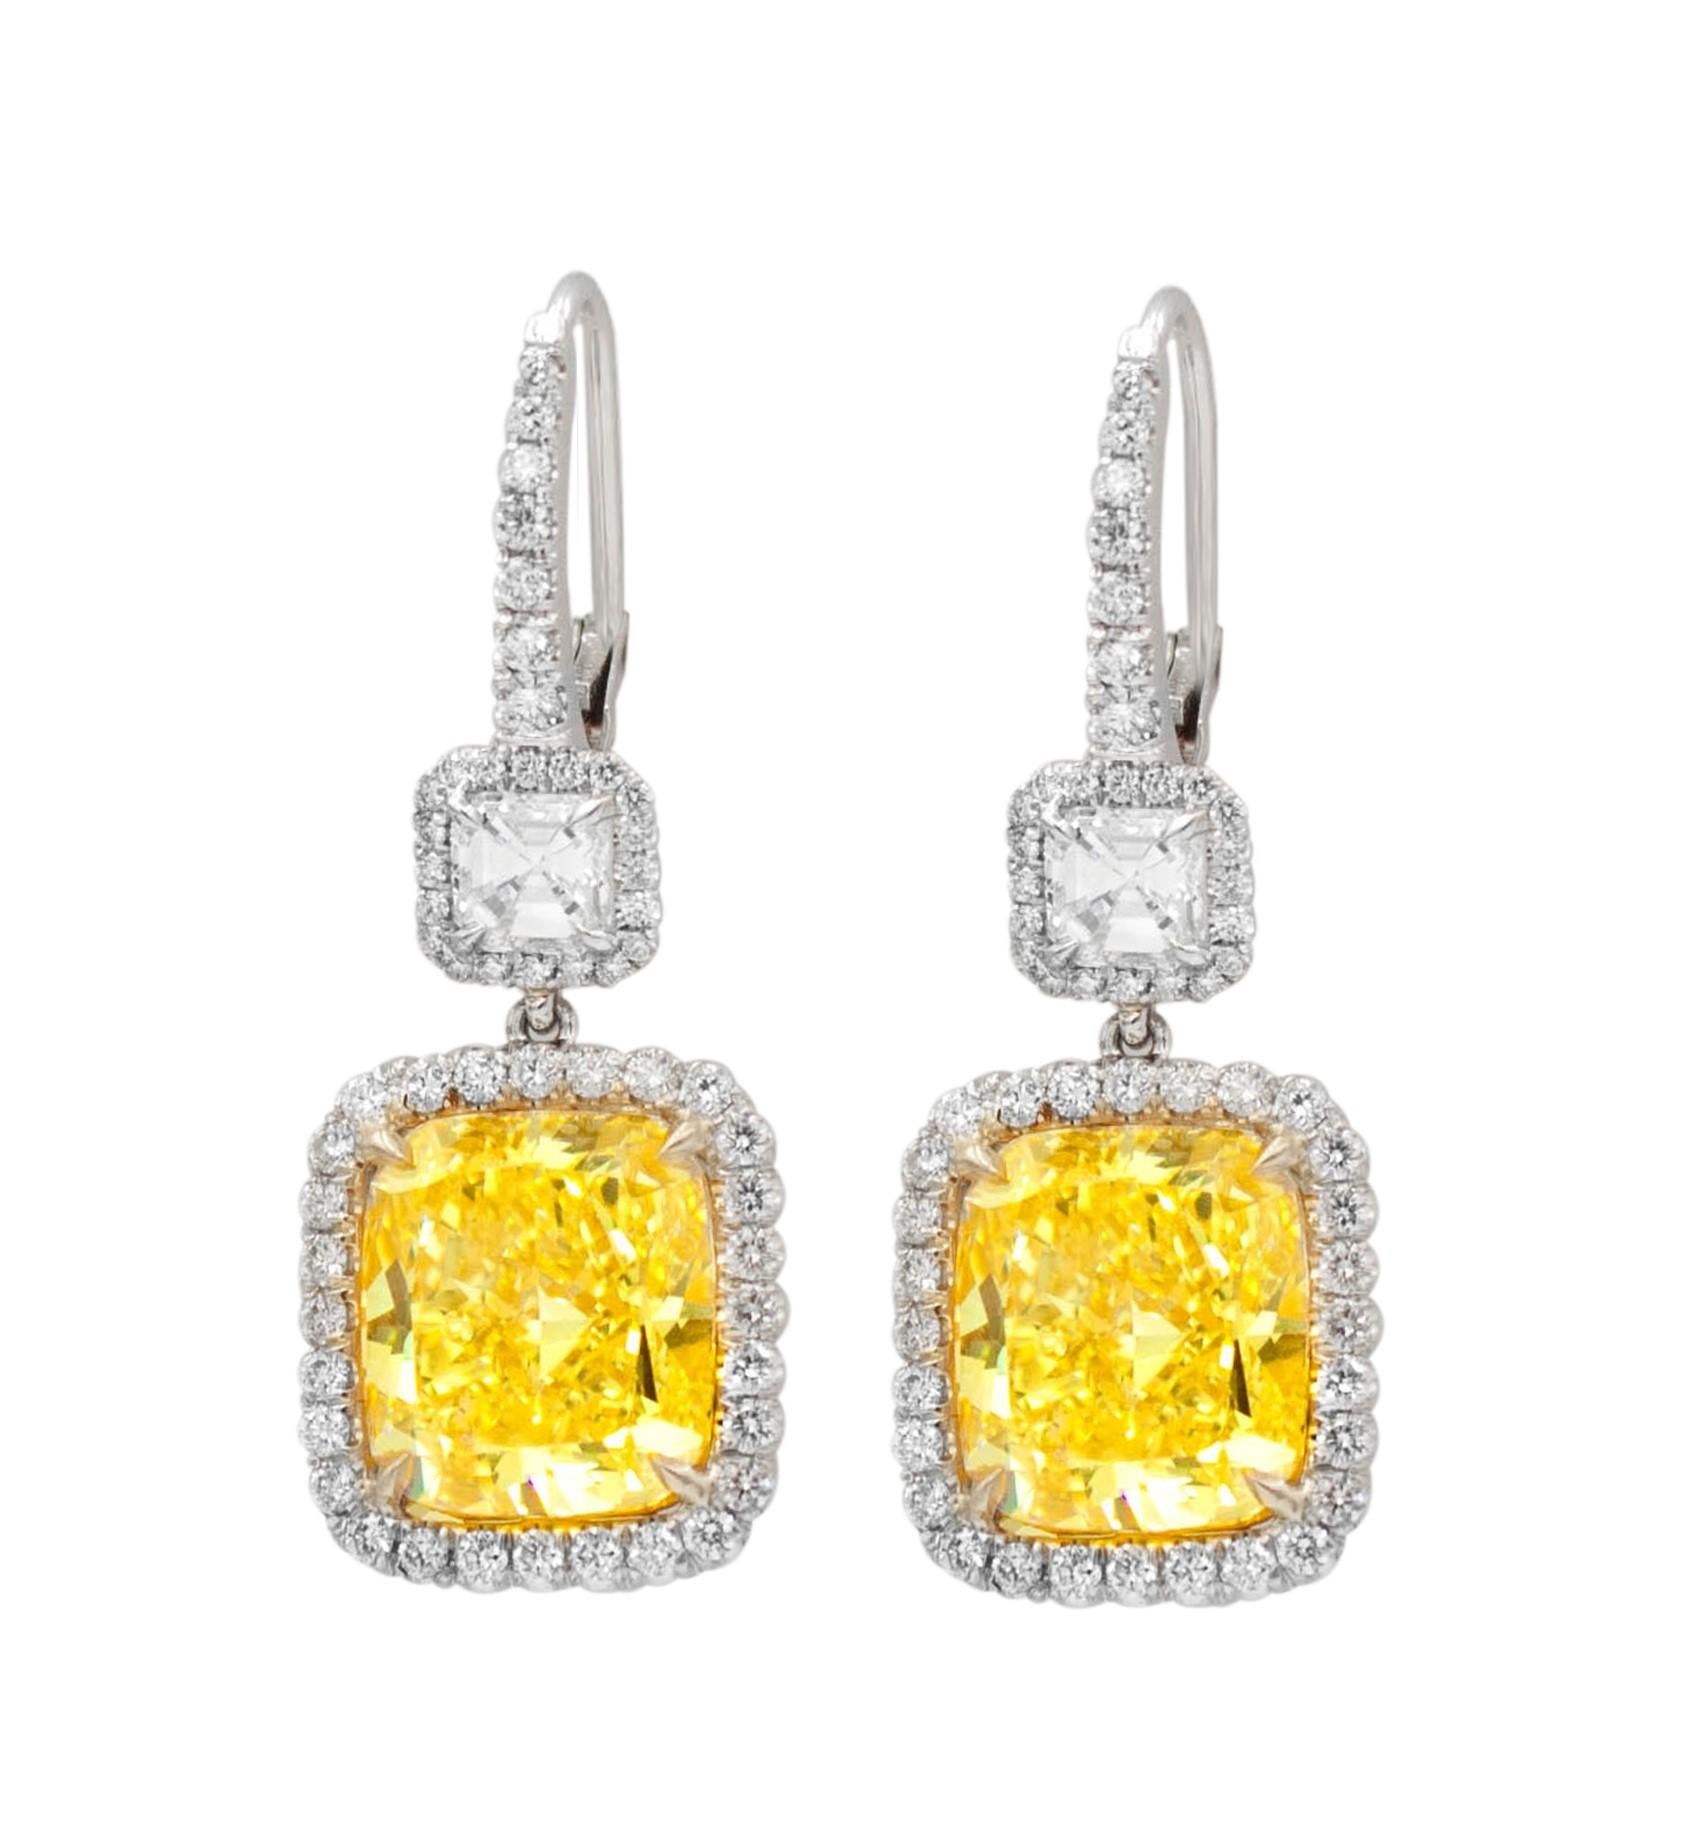 Radiant Cut Platinum and 18kt Yellow Gold Fancy Yellow Diamond Earrings For Sale